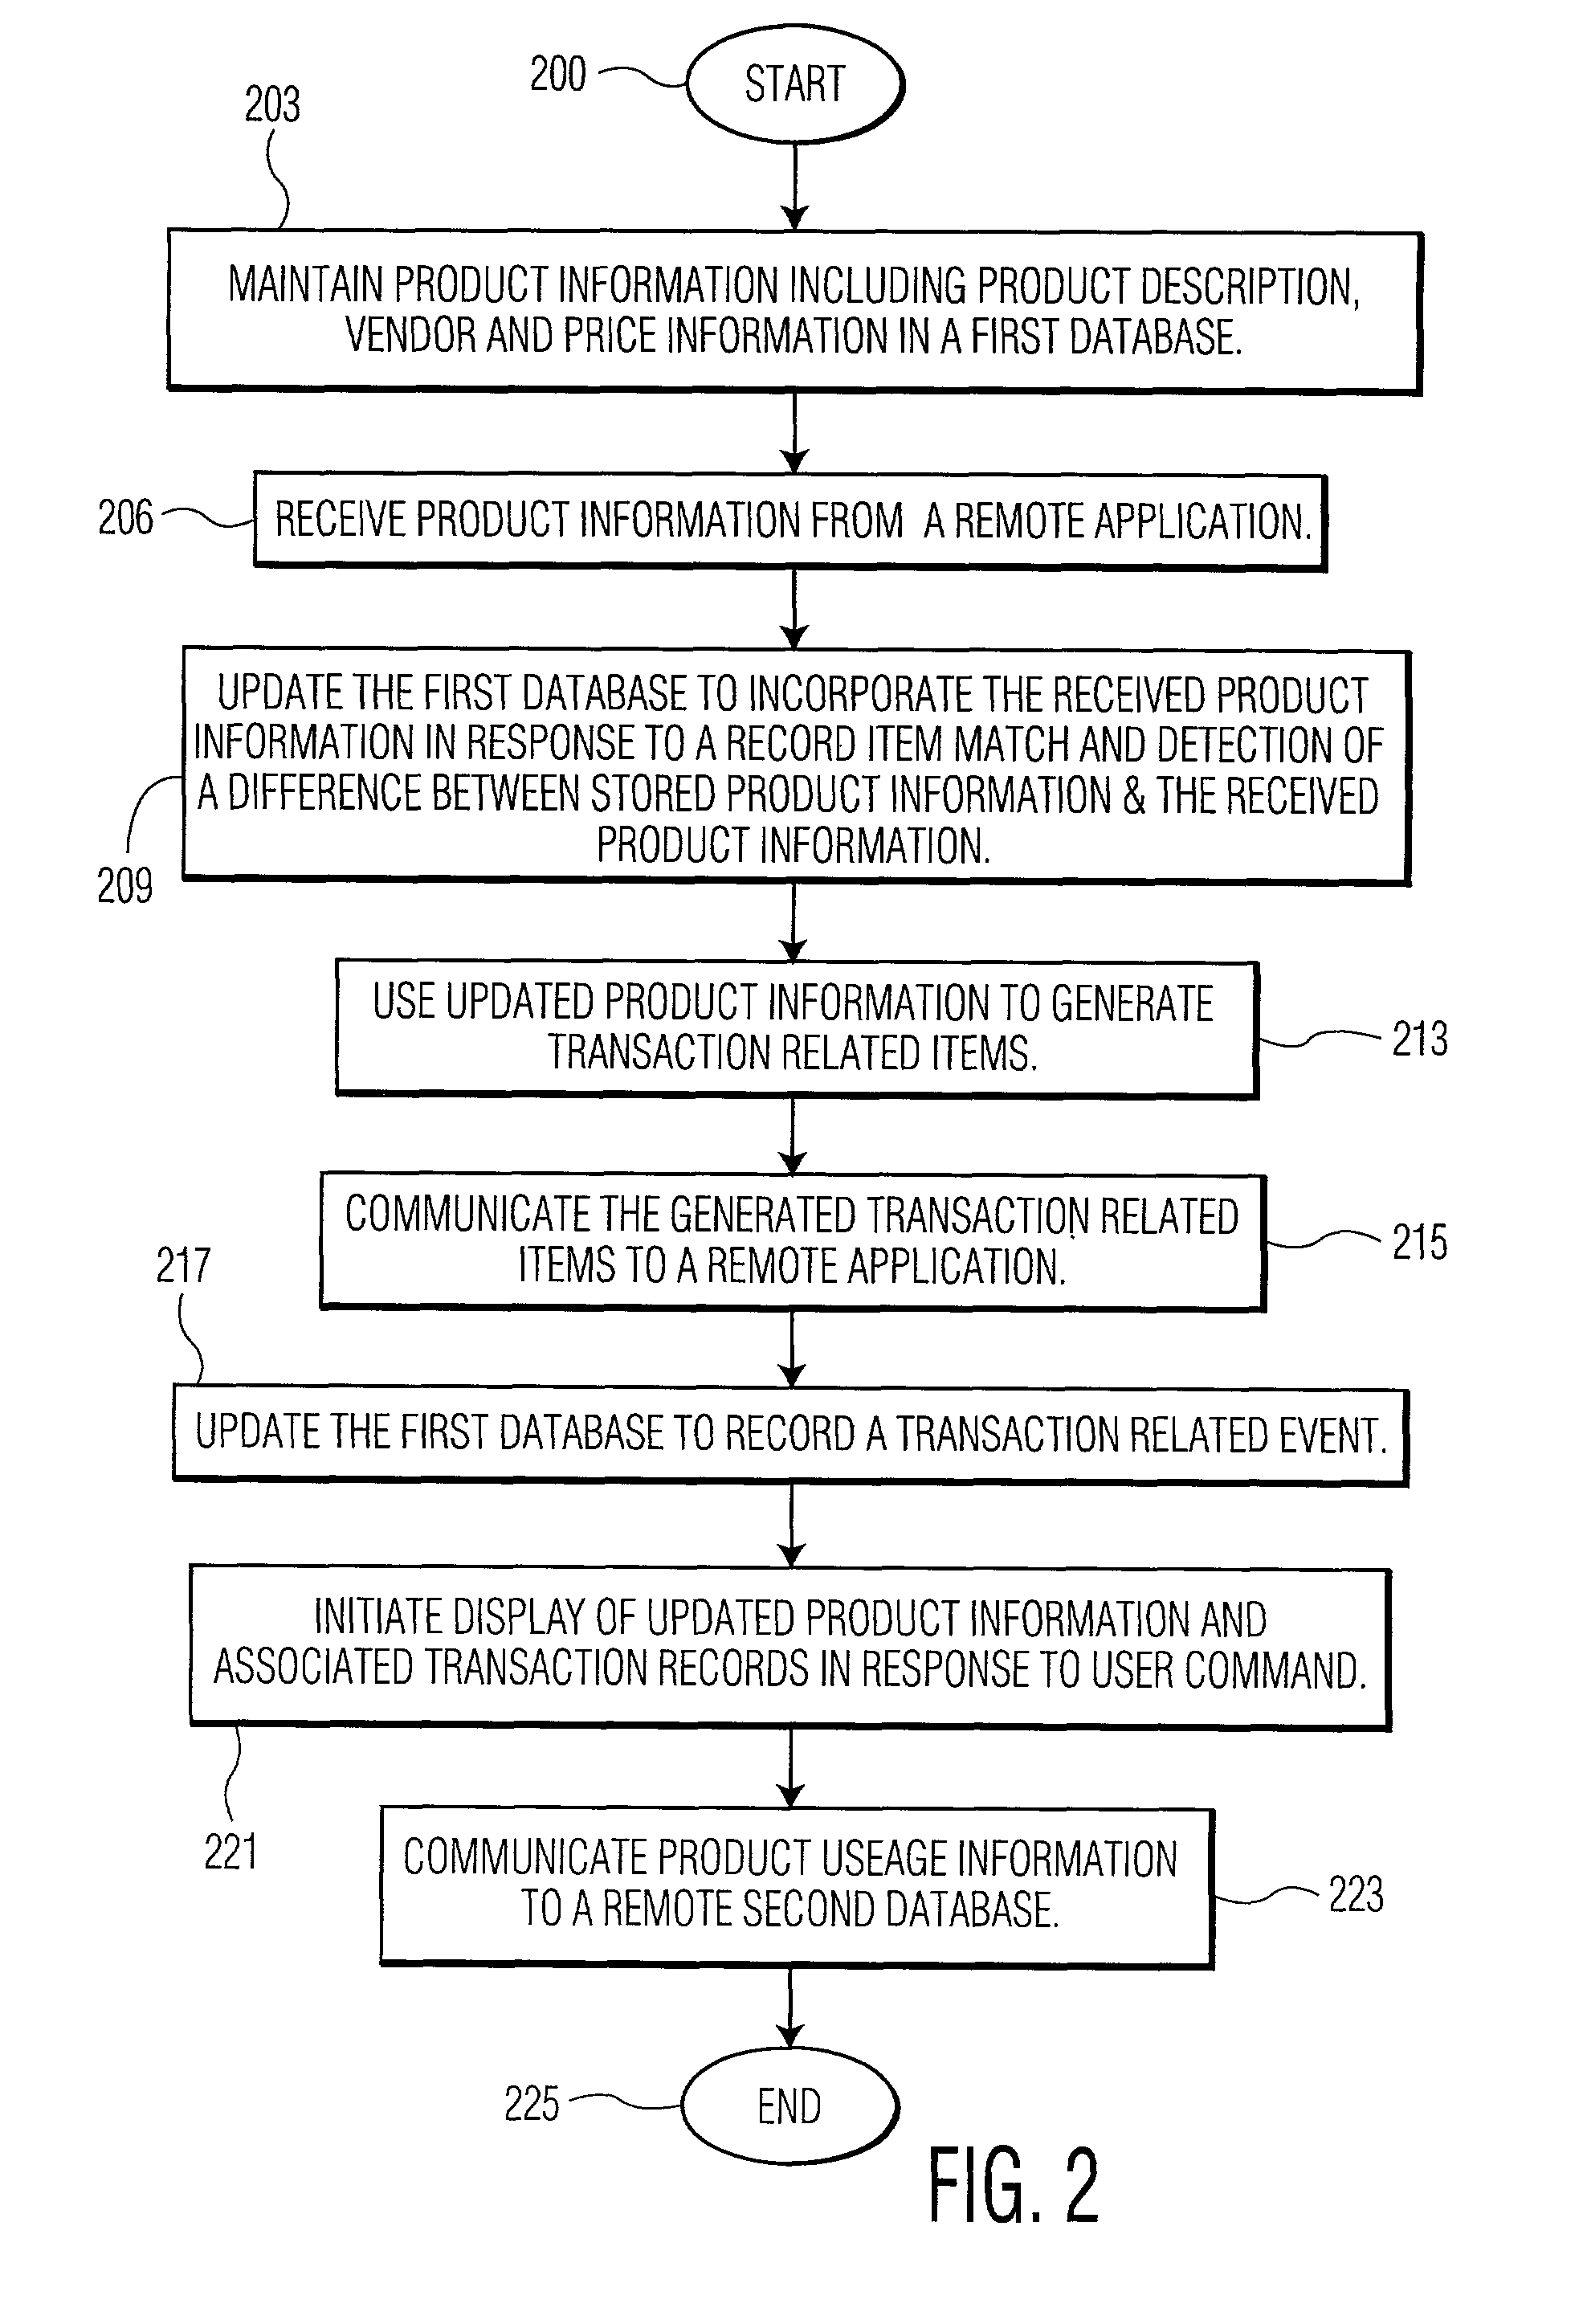 System for processing product information in support of commercial transactions